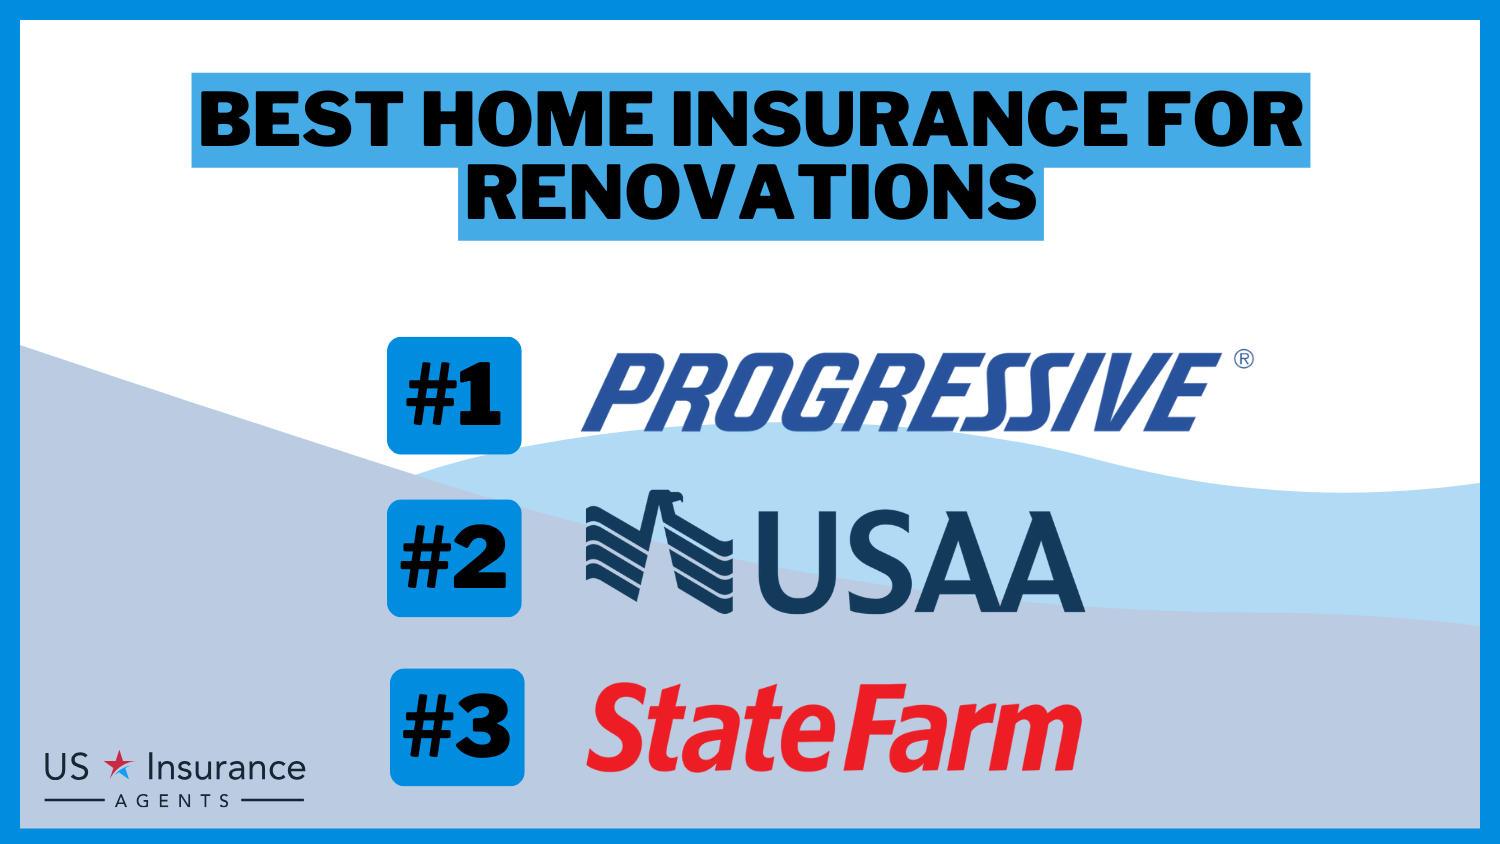 Progressive, USAA, and State Farm: Best Home Insurance for Renovations